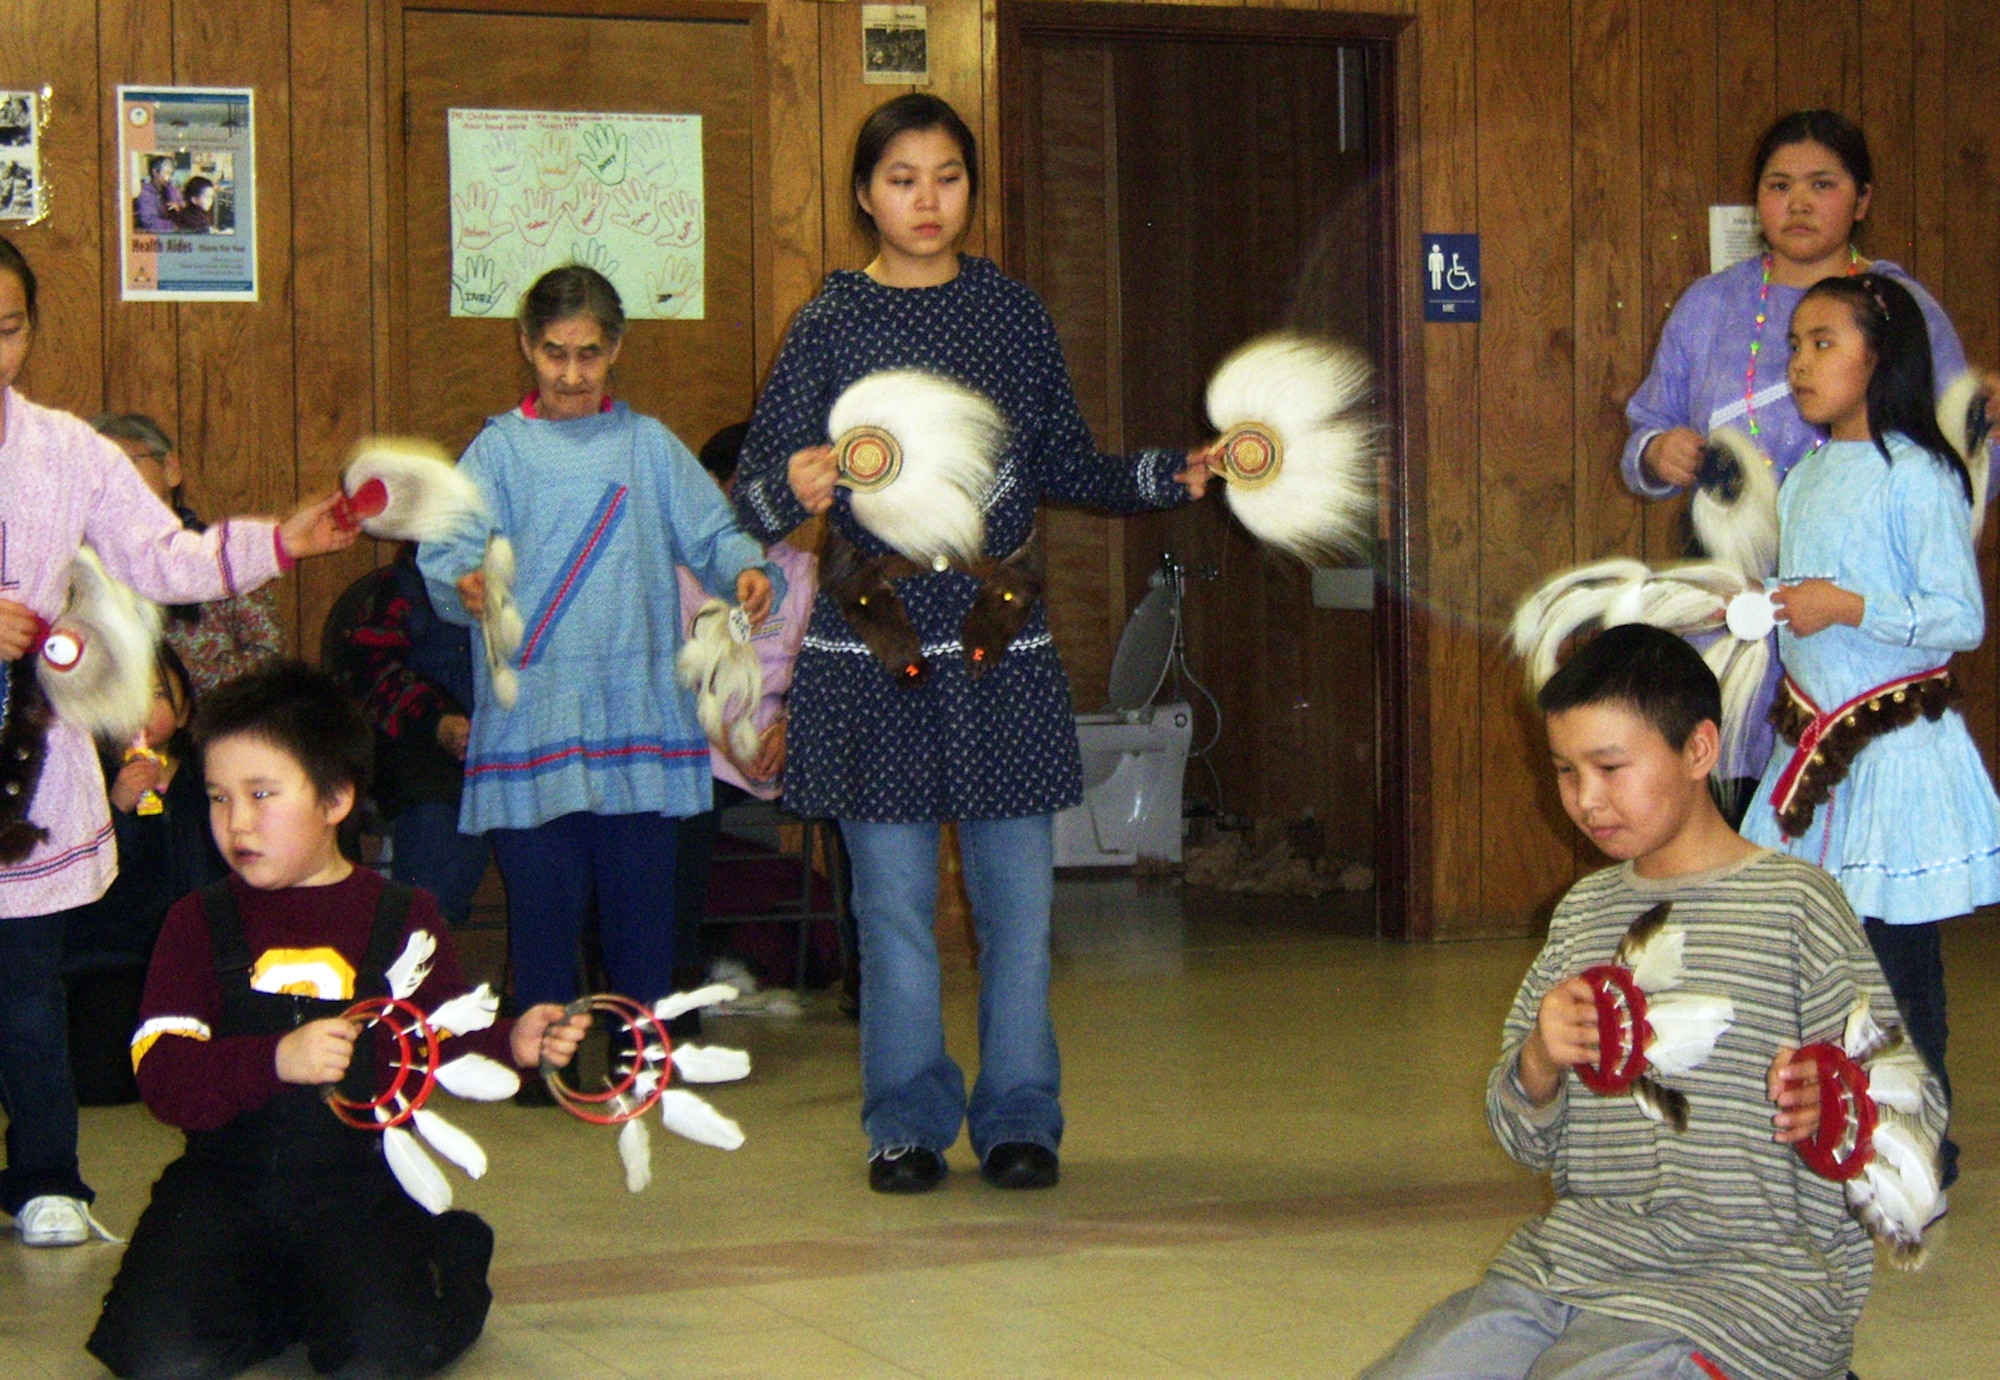 Lt. Col. Cheryl Hooper said she felt immersed in the culture of Alaknuk, Alaska, a small village she and a team of other military medical personnel were sent to in support of Operation Arctic Care. The annual exercise provides health care to underserved residents of rural Alaska. Native dancing (seen here) is part of the Alakanuk heritage that villagers want to preserve. (Courtesy photo)